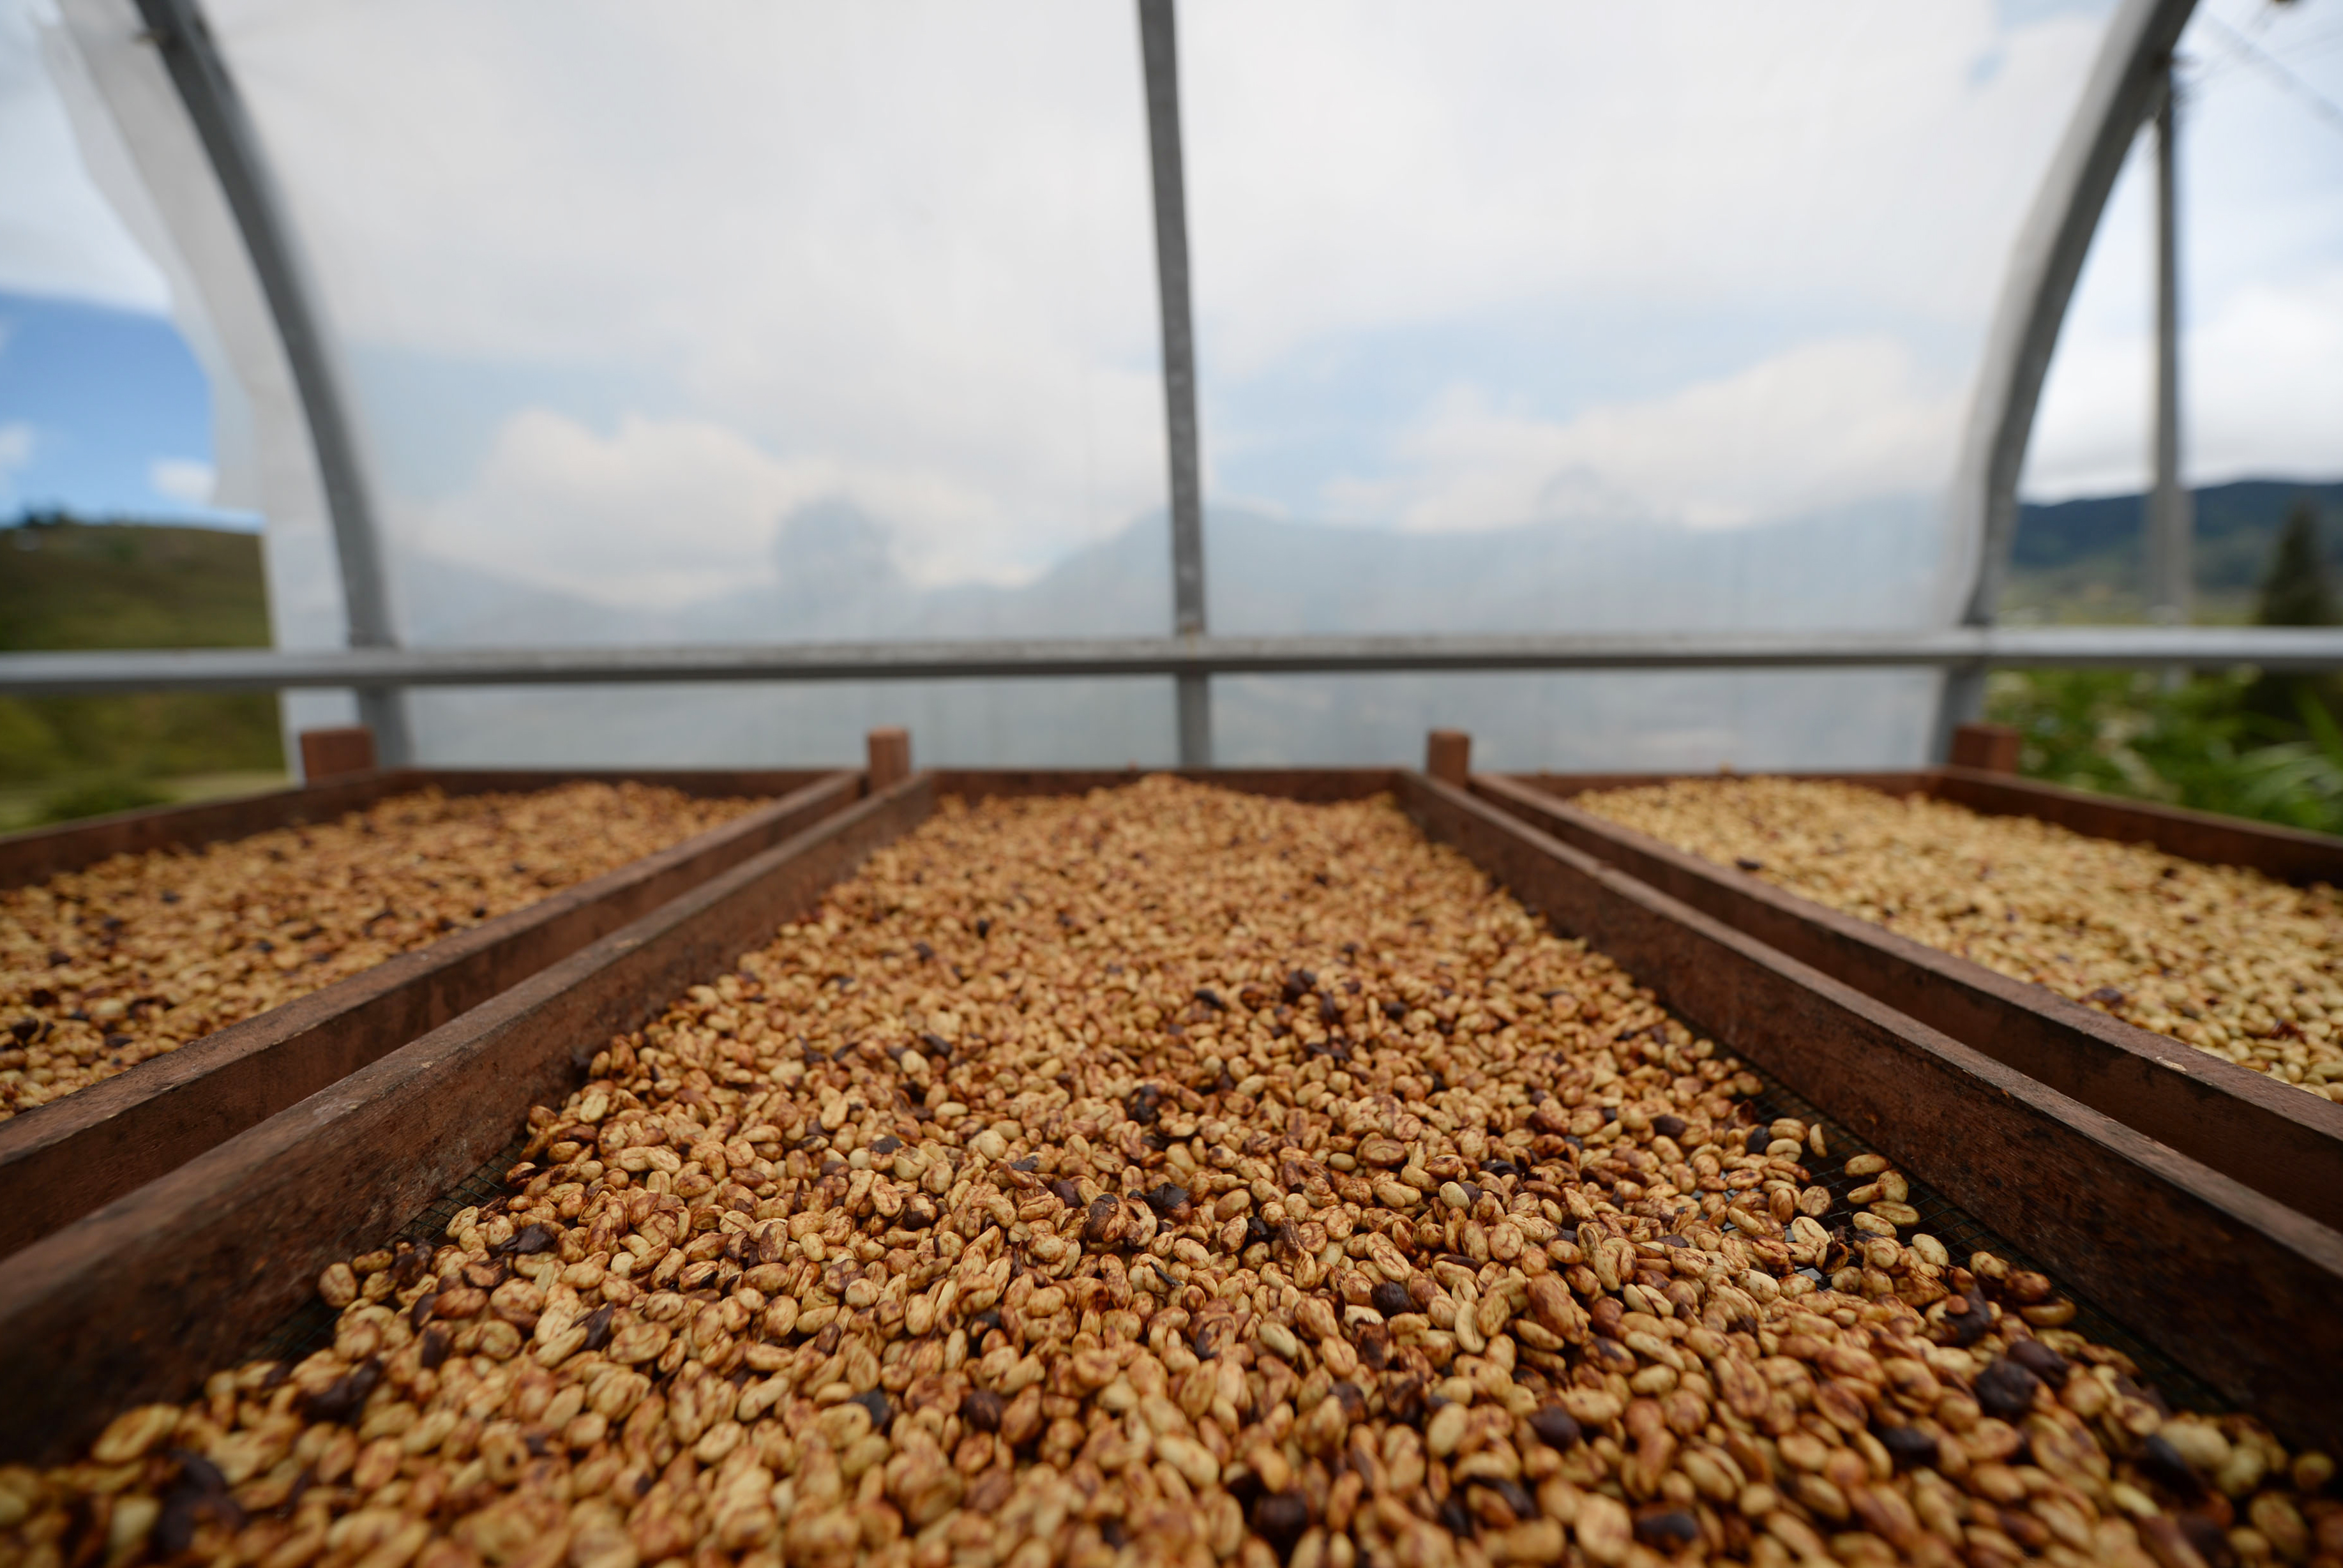 Arabica coffee beans are laid out for drying at the Solok Radjo Cooperative coffee farm in Alahan Panjang, West Sumatra, Indonesia, on Friday, July 15, 2016. Coffee production in Indonesia will probably drop 10 percent this year after dry weather caused by the worst El Nino in almost two decades damaged some crops and delayed the harvest. (Dimas Ardian/Bloomberg via Getty Images)